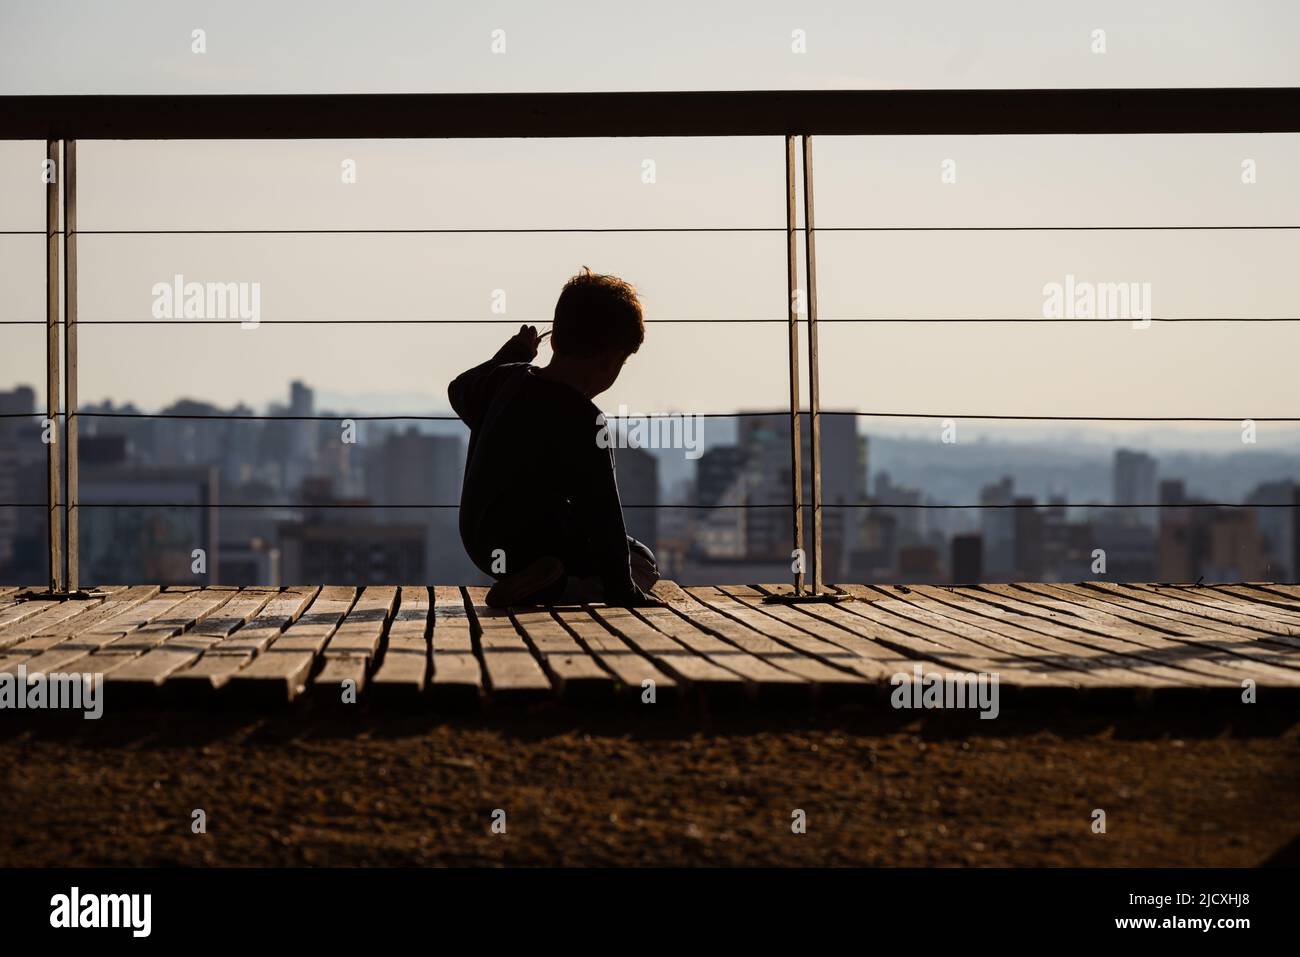 Rear view of a boy on the deck of Parque Amilcar Vianna Martins looking at the high rise buildings in Belo Horizonte, Minas Gerais, Brazil. Stock Photo